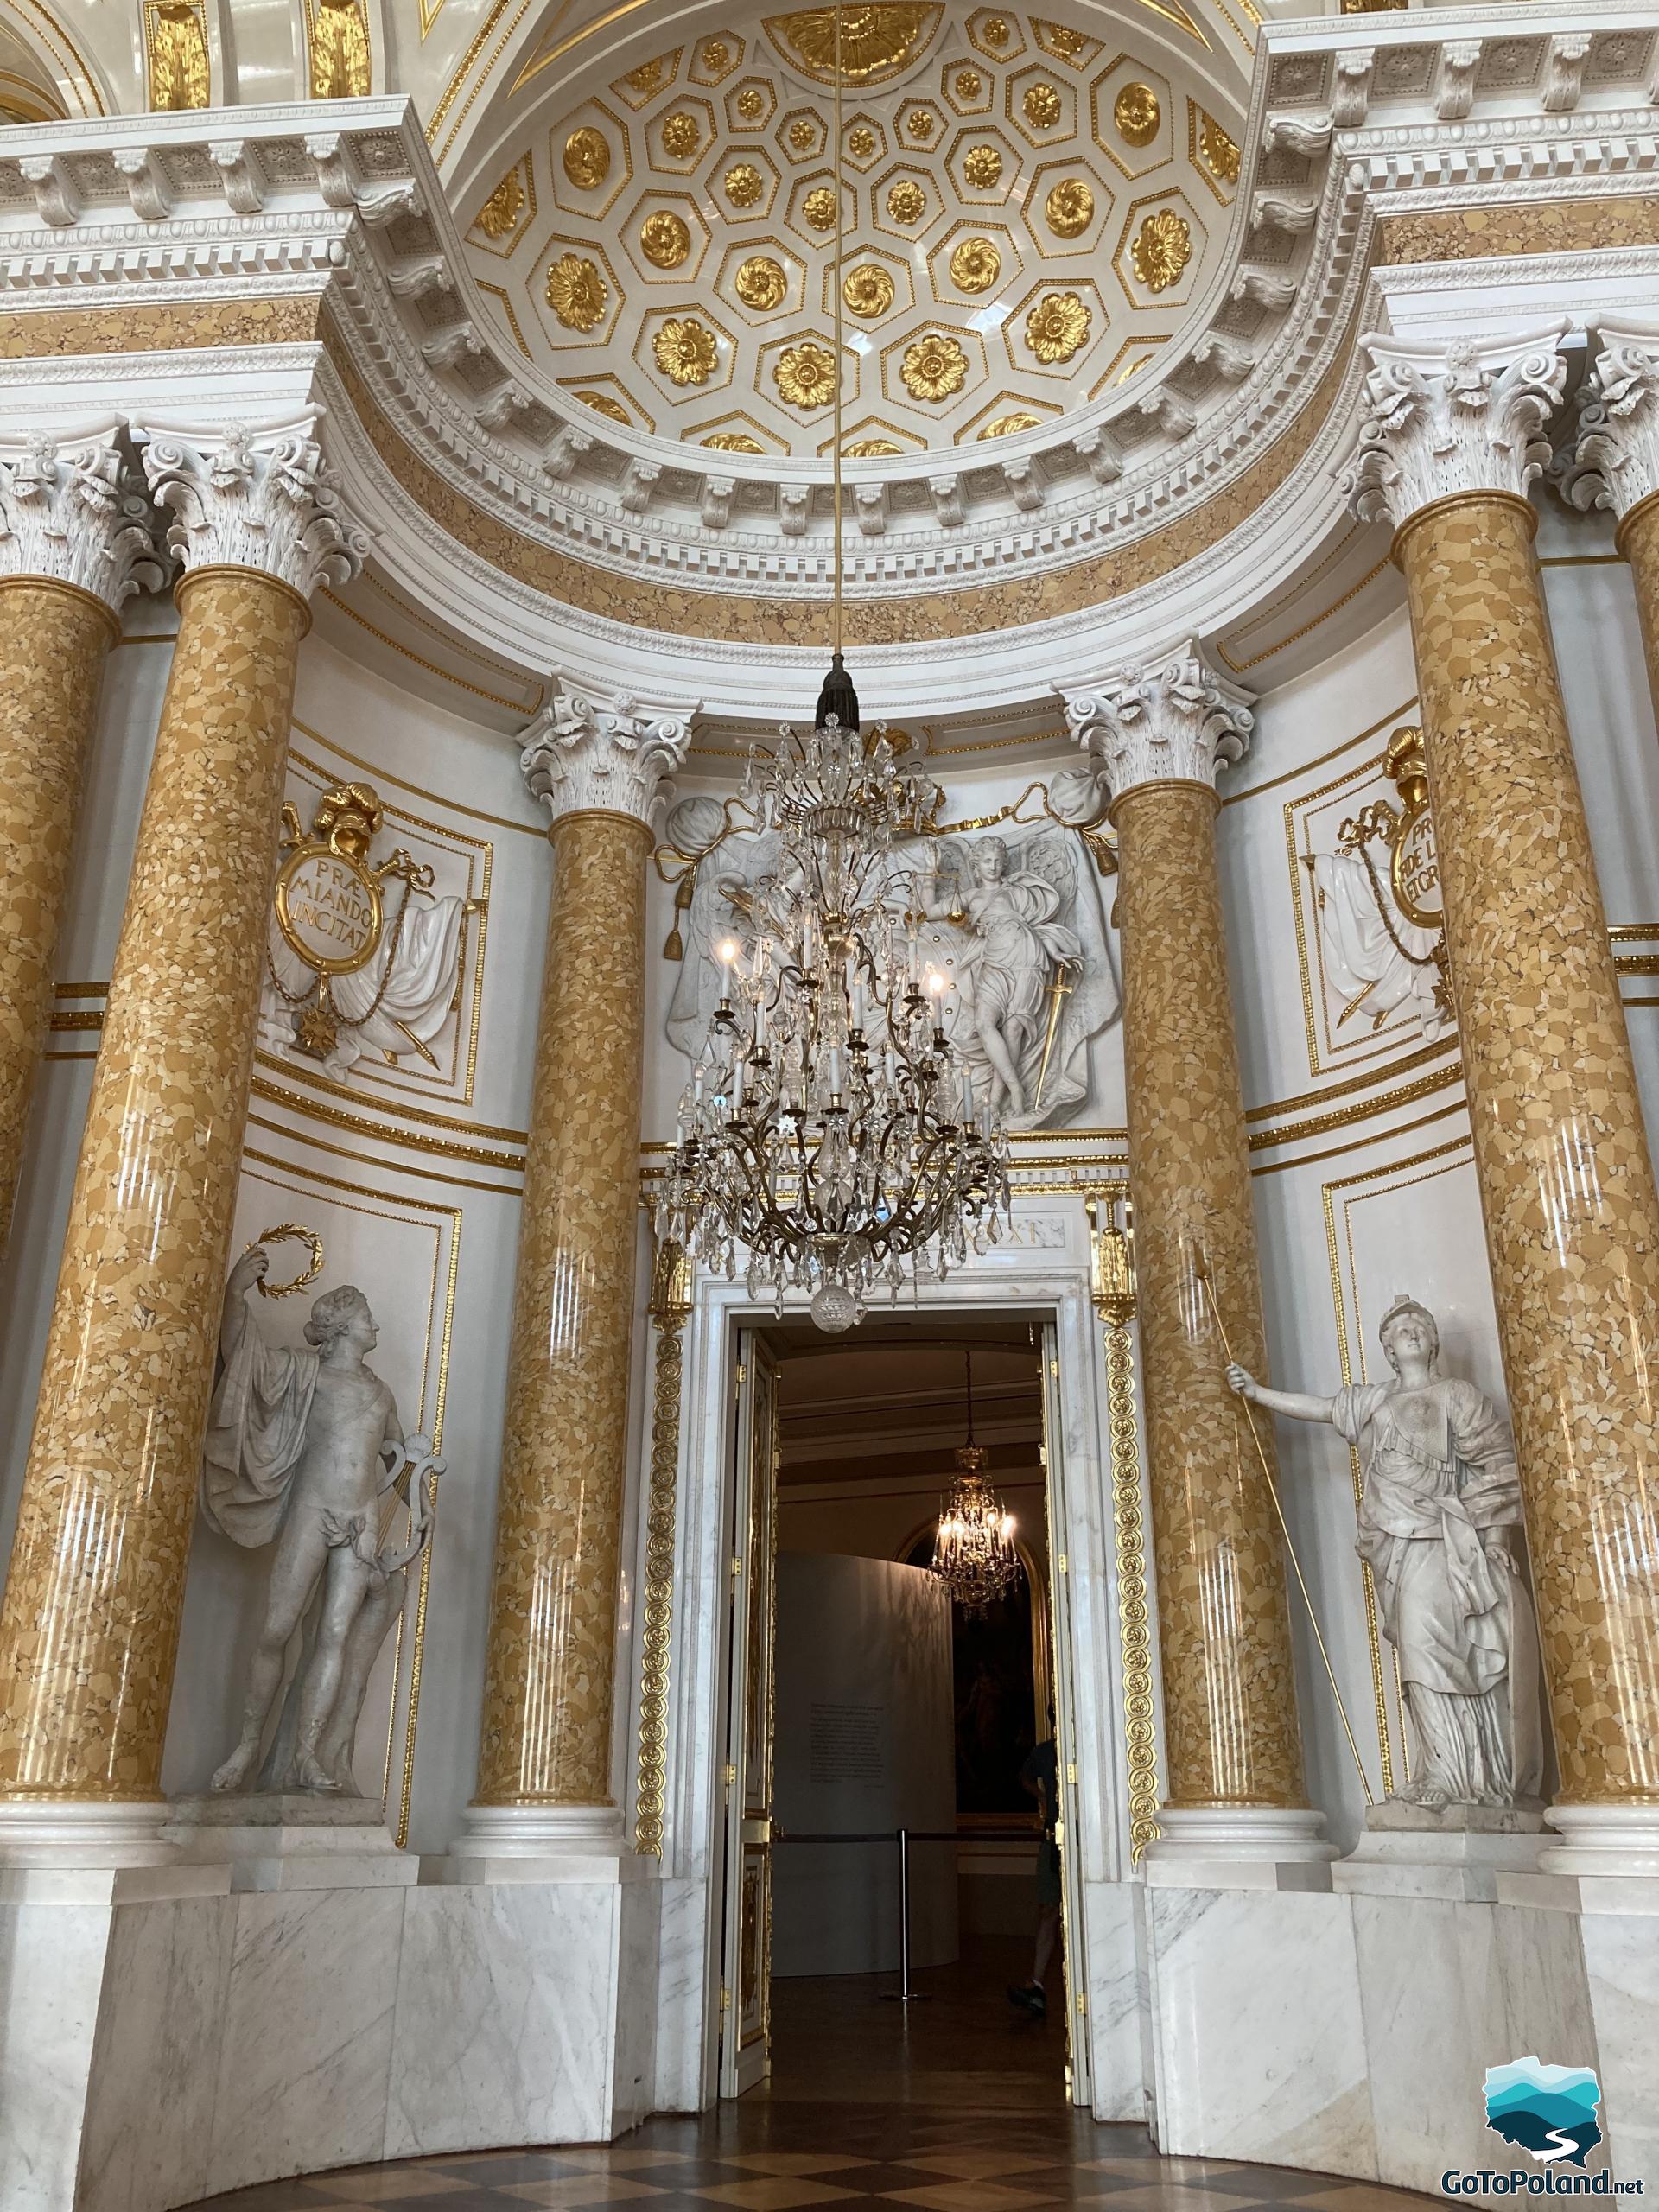 the main entrance to the ceremonial ballroom in the castle, crystal chandelier, yellow columns with Corinthian capitals and Roman style sculptures on both sides of the entrance